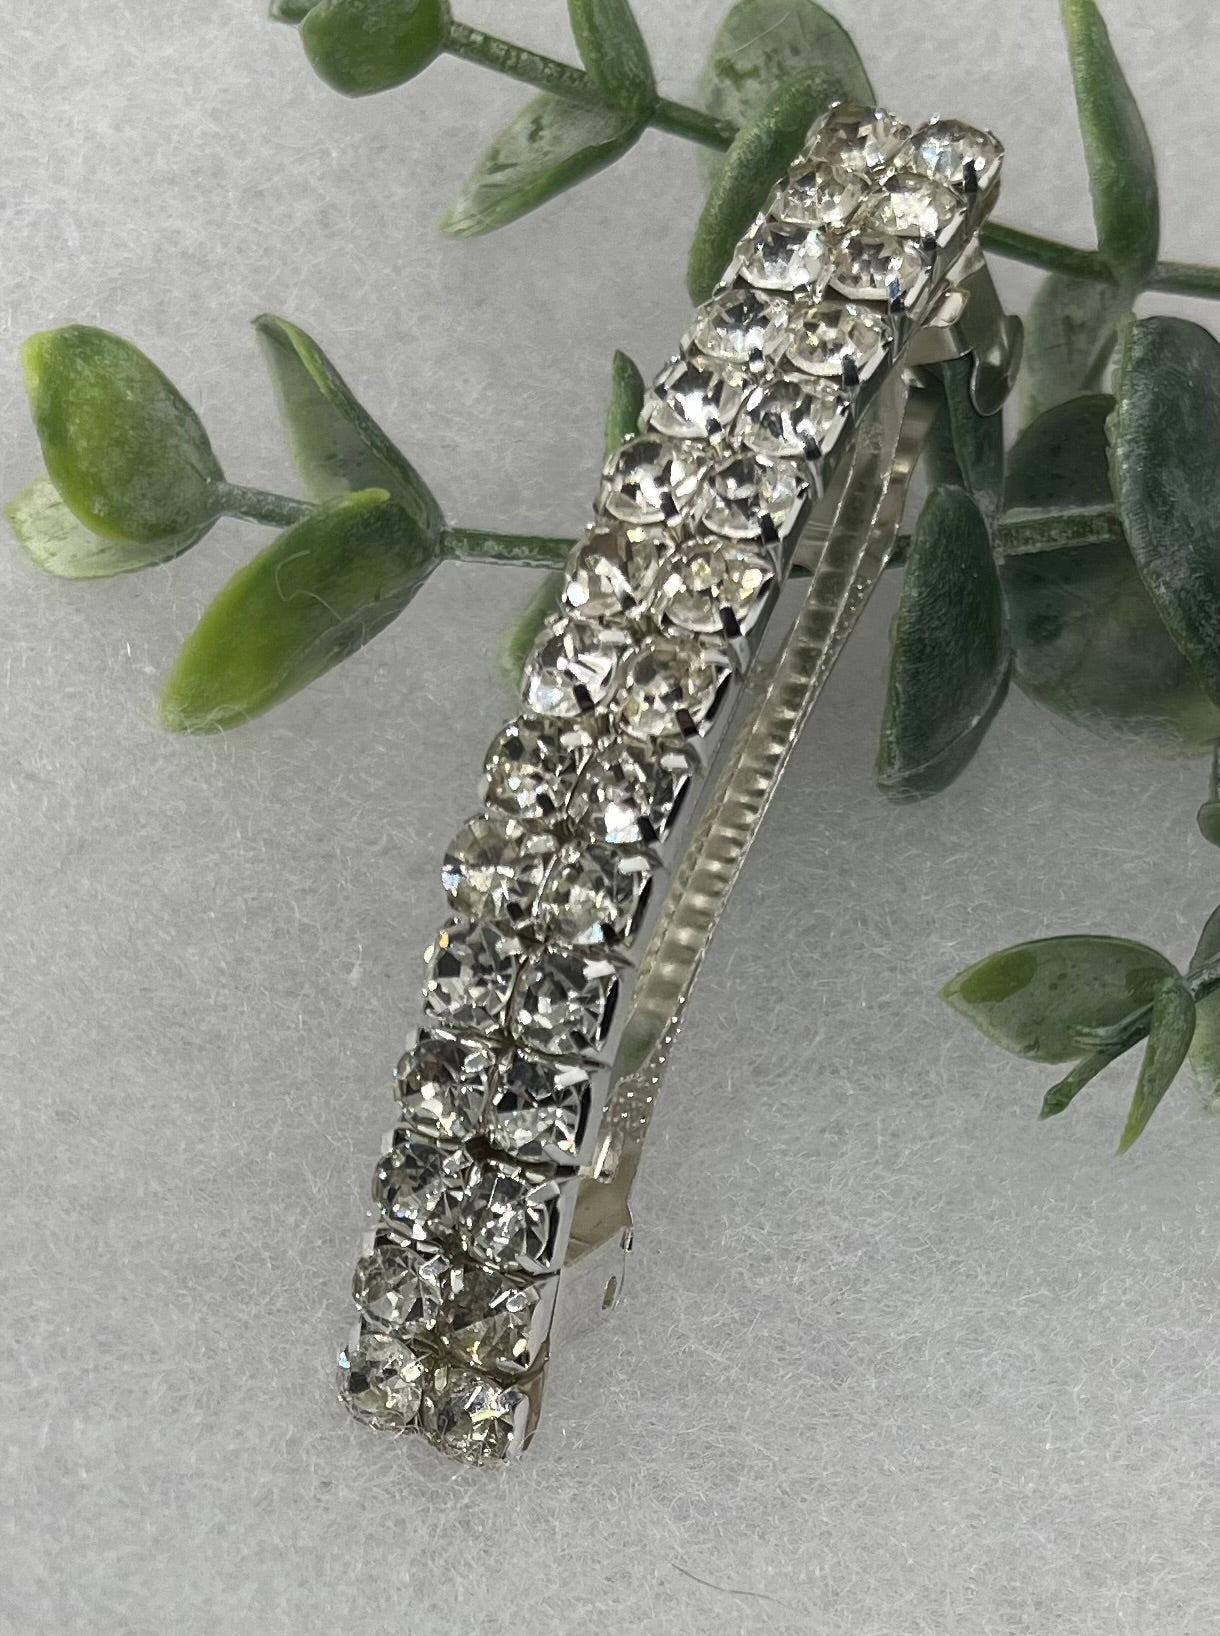 Clear Crystal Rhinestone Barrette approximately 3.0” Metal silver tone formal hair accessory gift wedding bridal shower accessories